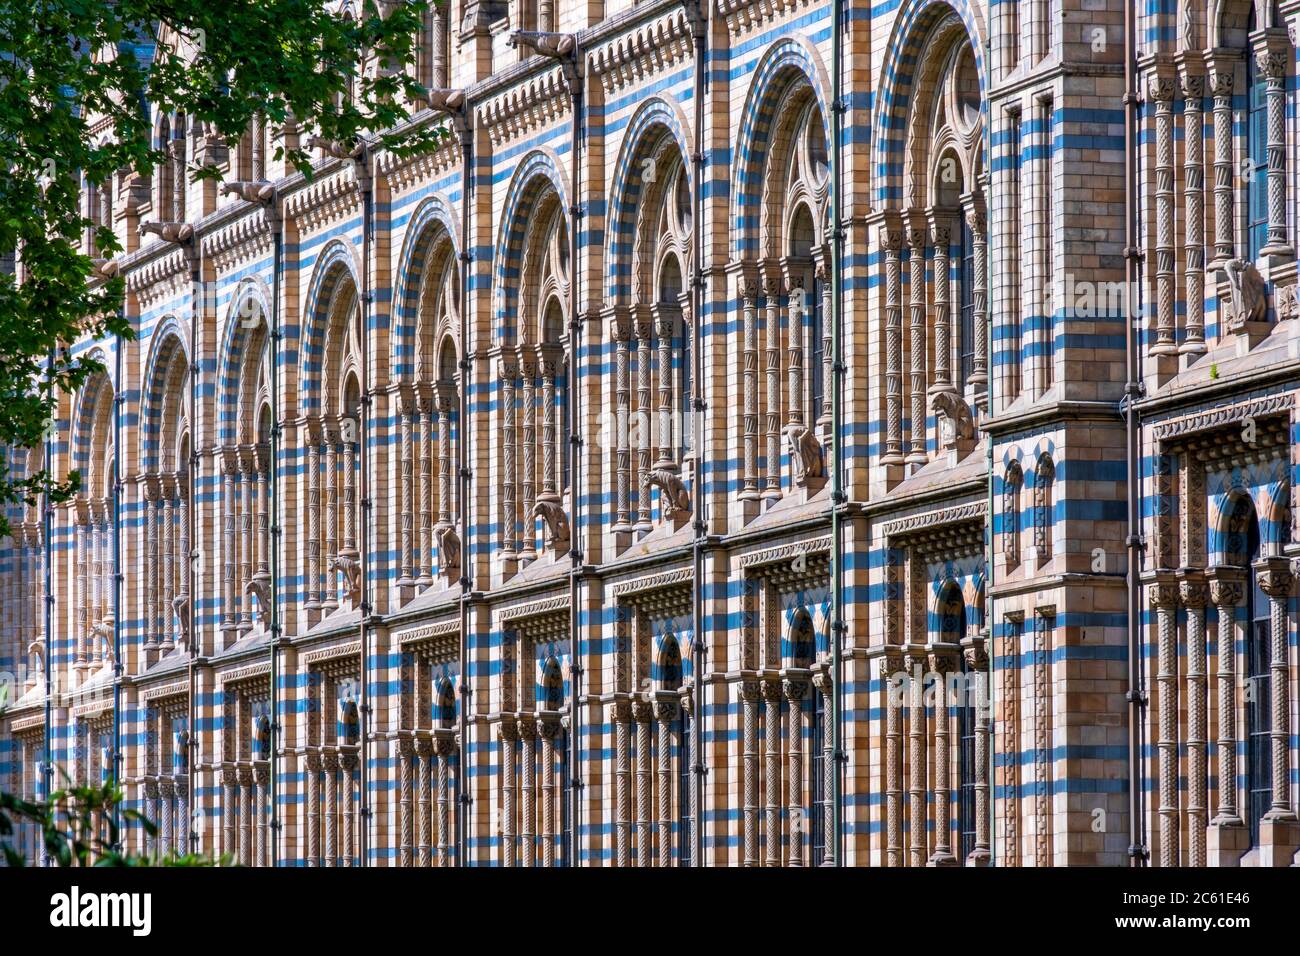 United Kingdom, England, London, South Kensington. The facade of the Natural History museum by Alfred Waterhouse Stock Photo